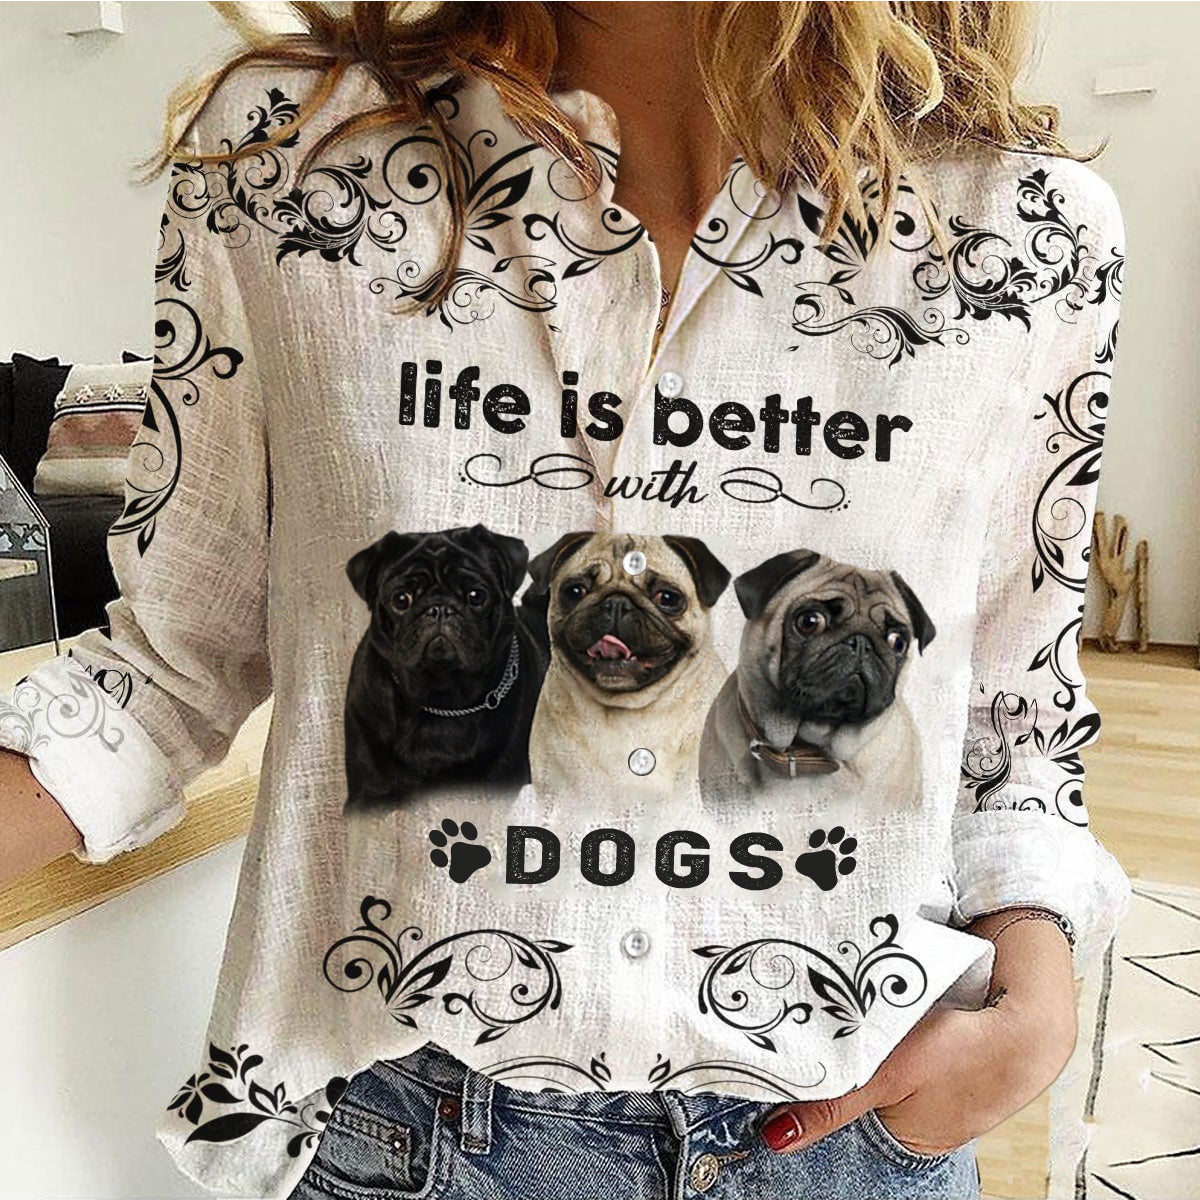 Pugs-Life Is Better With Dogs Women's Long-Sleeve Shirt